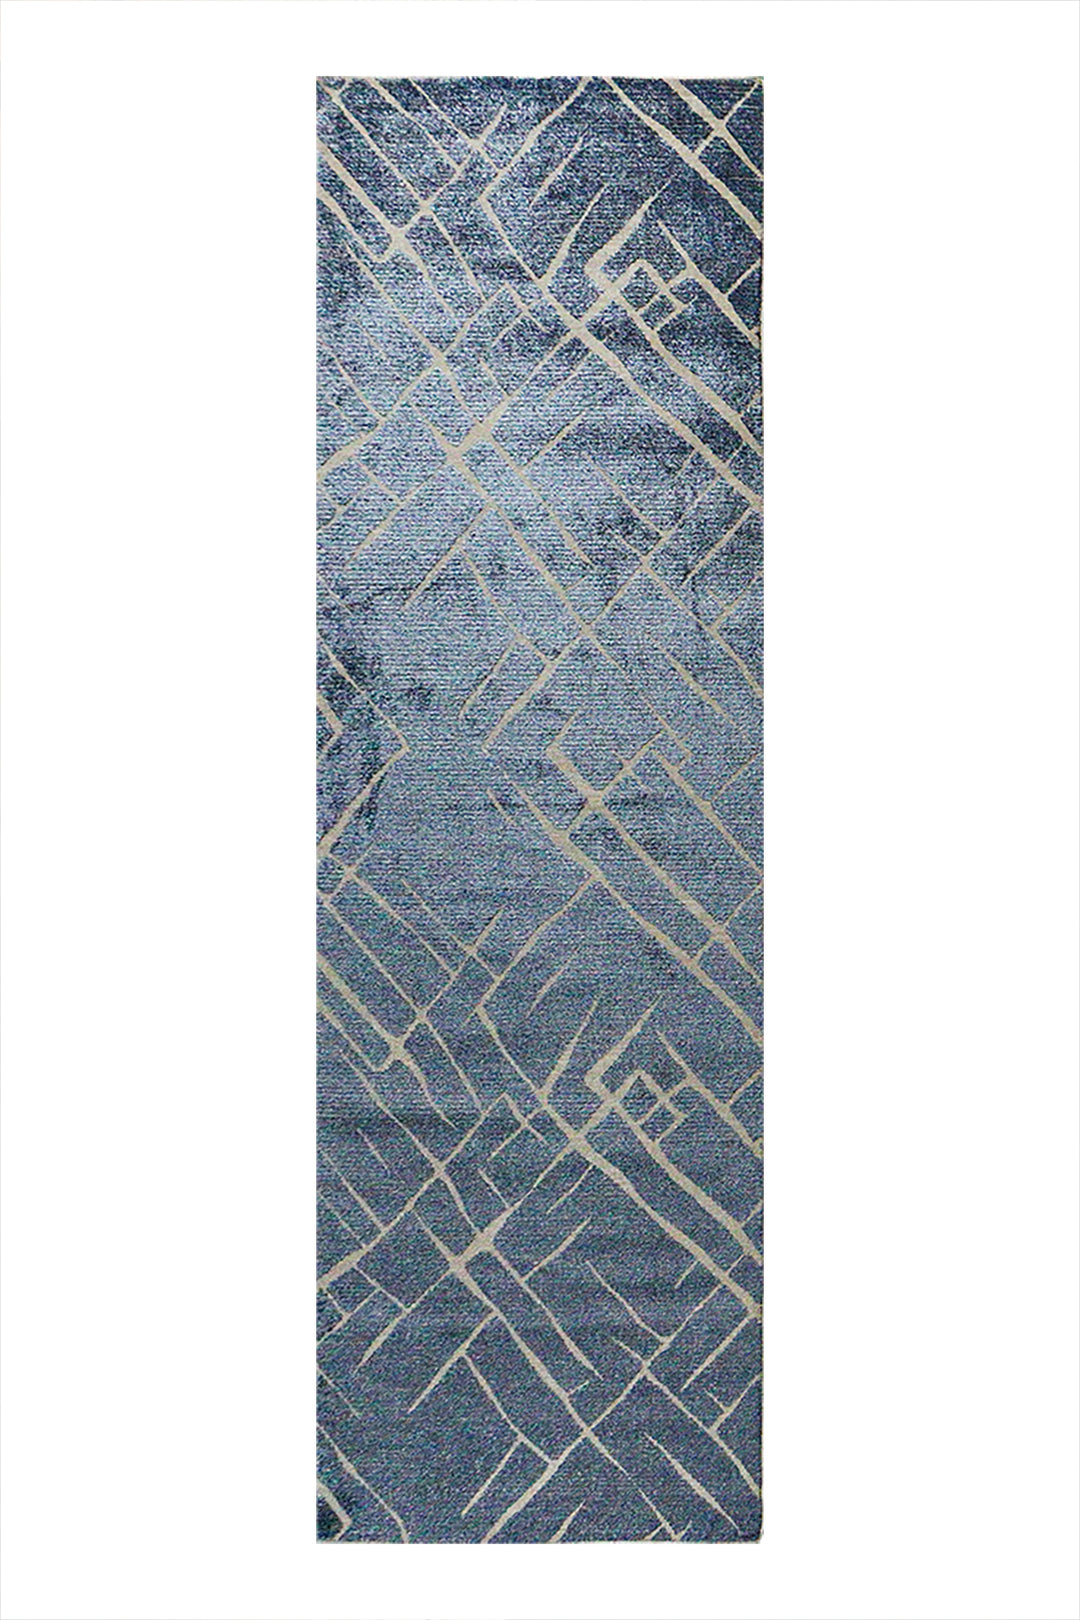 Turkish Modern Festival 1 Rug - 3.2 x 9.8 FT - Gray and Blue - Sleek and Minimalist for Chic Interiors